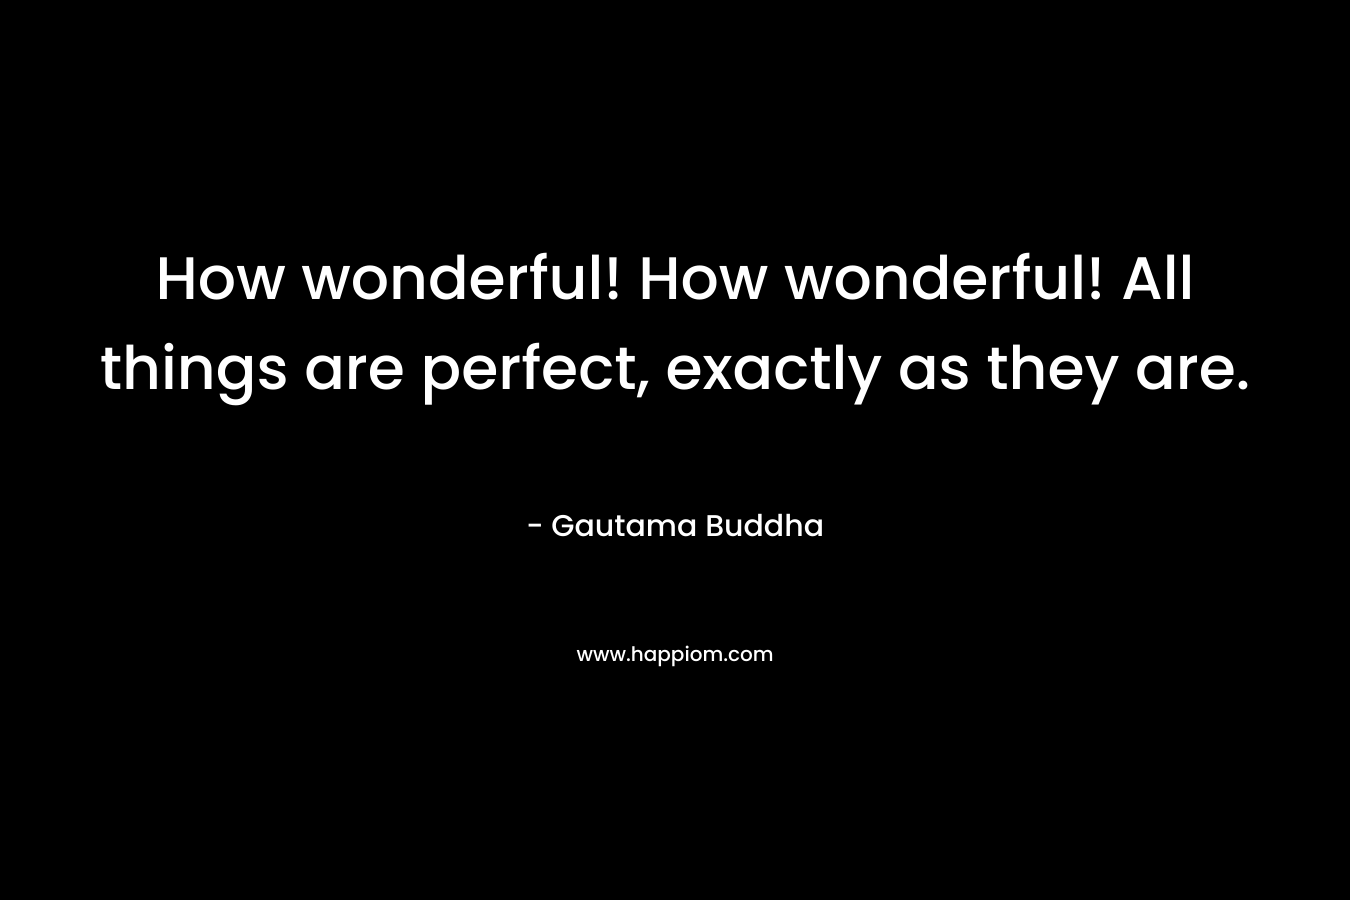 How wonderful! How wonderful! All things are perfect, exactly as they are.